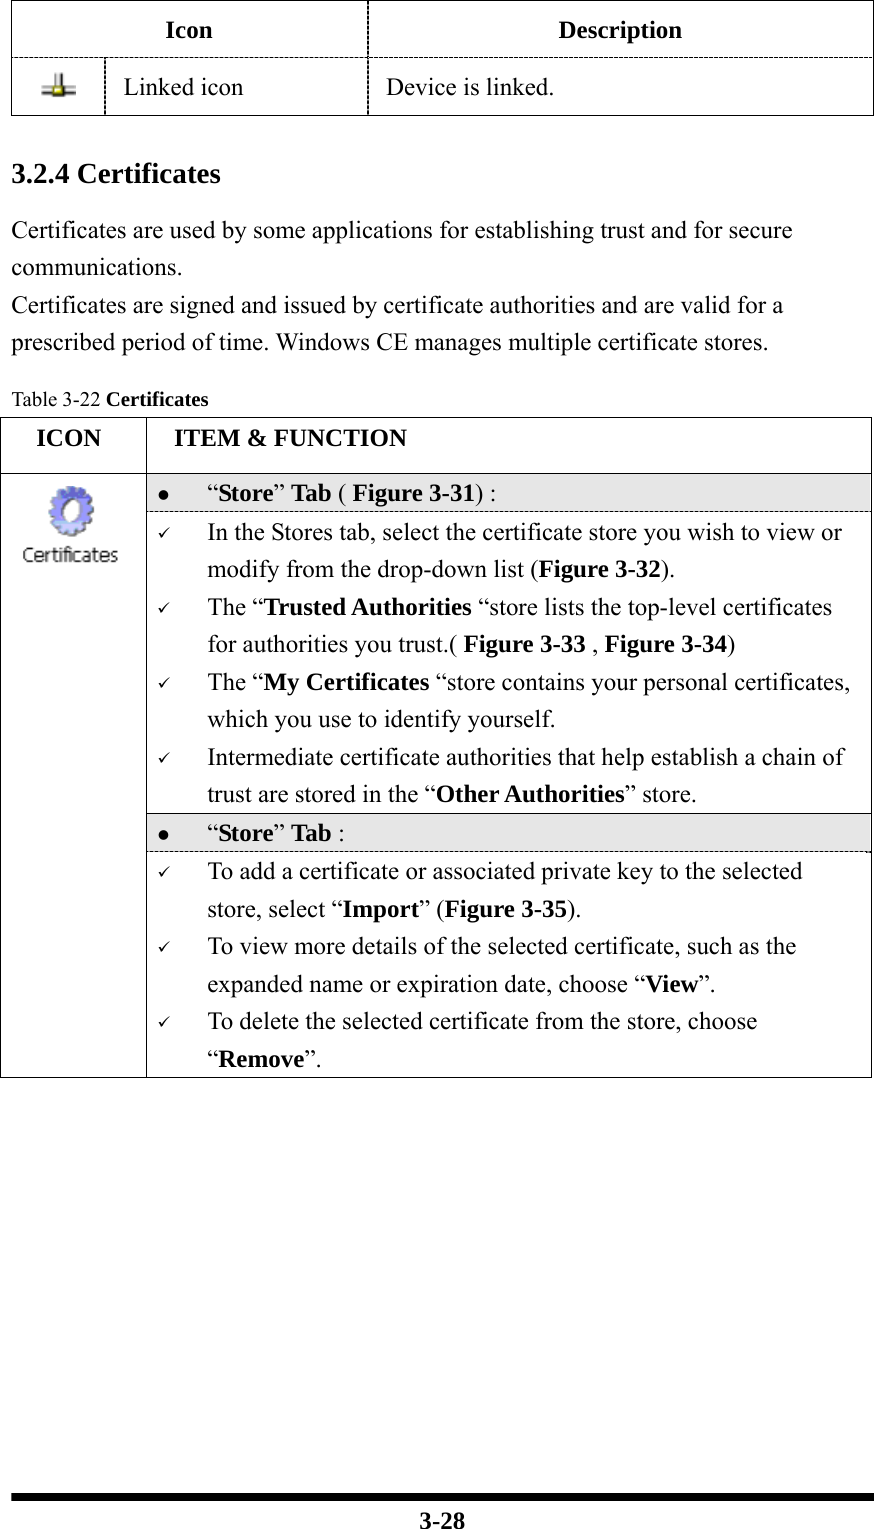  3-28 Icon Description  Linked icon  Device is linked.   3.2.4 Certificates  Certificates are used by some applications for establishing trust and for secure communications. Certificates are signed and issued by certificate authorities and are valid for a prescribed period of time. Windows CE manages multiple certificate stores.  Table 3-22 Certificates   ICON   ITEM &amp; FUNCTION z “Store” Tab ( Figure 3-31) :   9 In the Stores tab, select the certificate store you wish to view or modify from the drop-down list (Figure 3-32).   9 The “Trusted Authorities “store lists the top-level certificates for authorities you trust.( Figure 3-33 , Figure 3-34)   9 The “My Certificates “store contains your personal certificates, which you use to identify yourself.   9 Intermediate certificate authorities that help establish a chain of trust are stored in the “Other Authorities” store. z “Store” Tab :    9 To add a certificate or associated private key to the selected store, select “Import” (Figure 3-35). 9 To view more details of the selected certificate, such as the expanded name or expiration date, choose “View”. 9 To delete the selected certificate from the store, choose “Remove”.   